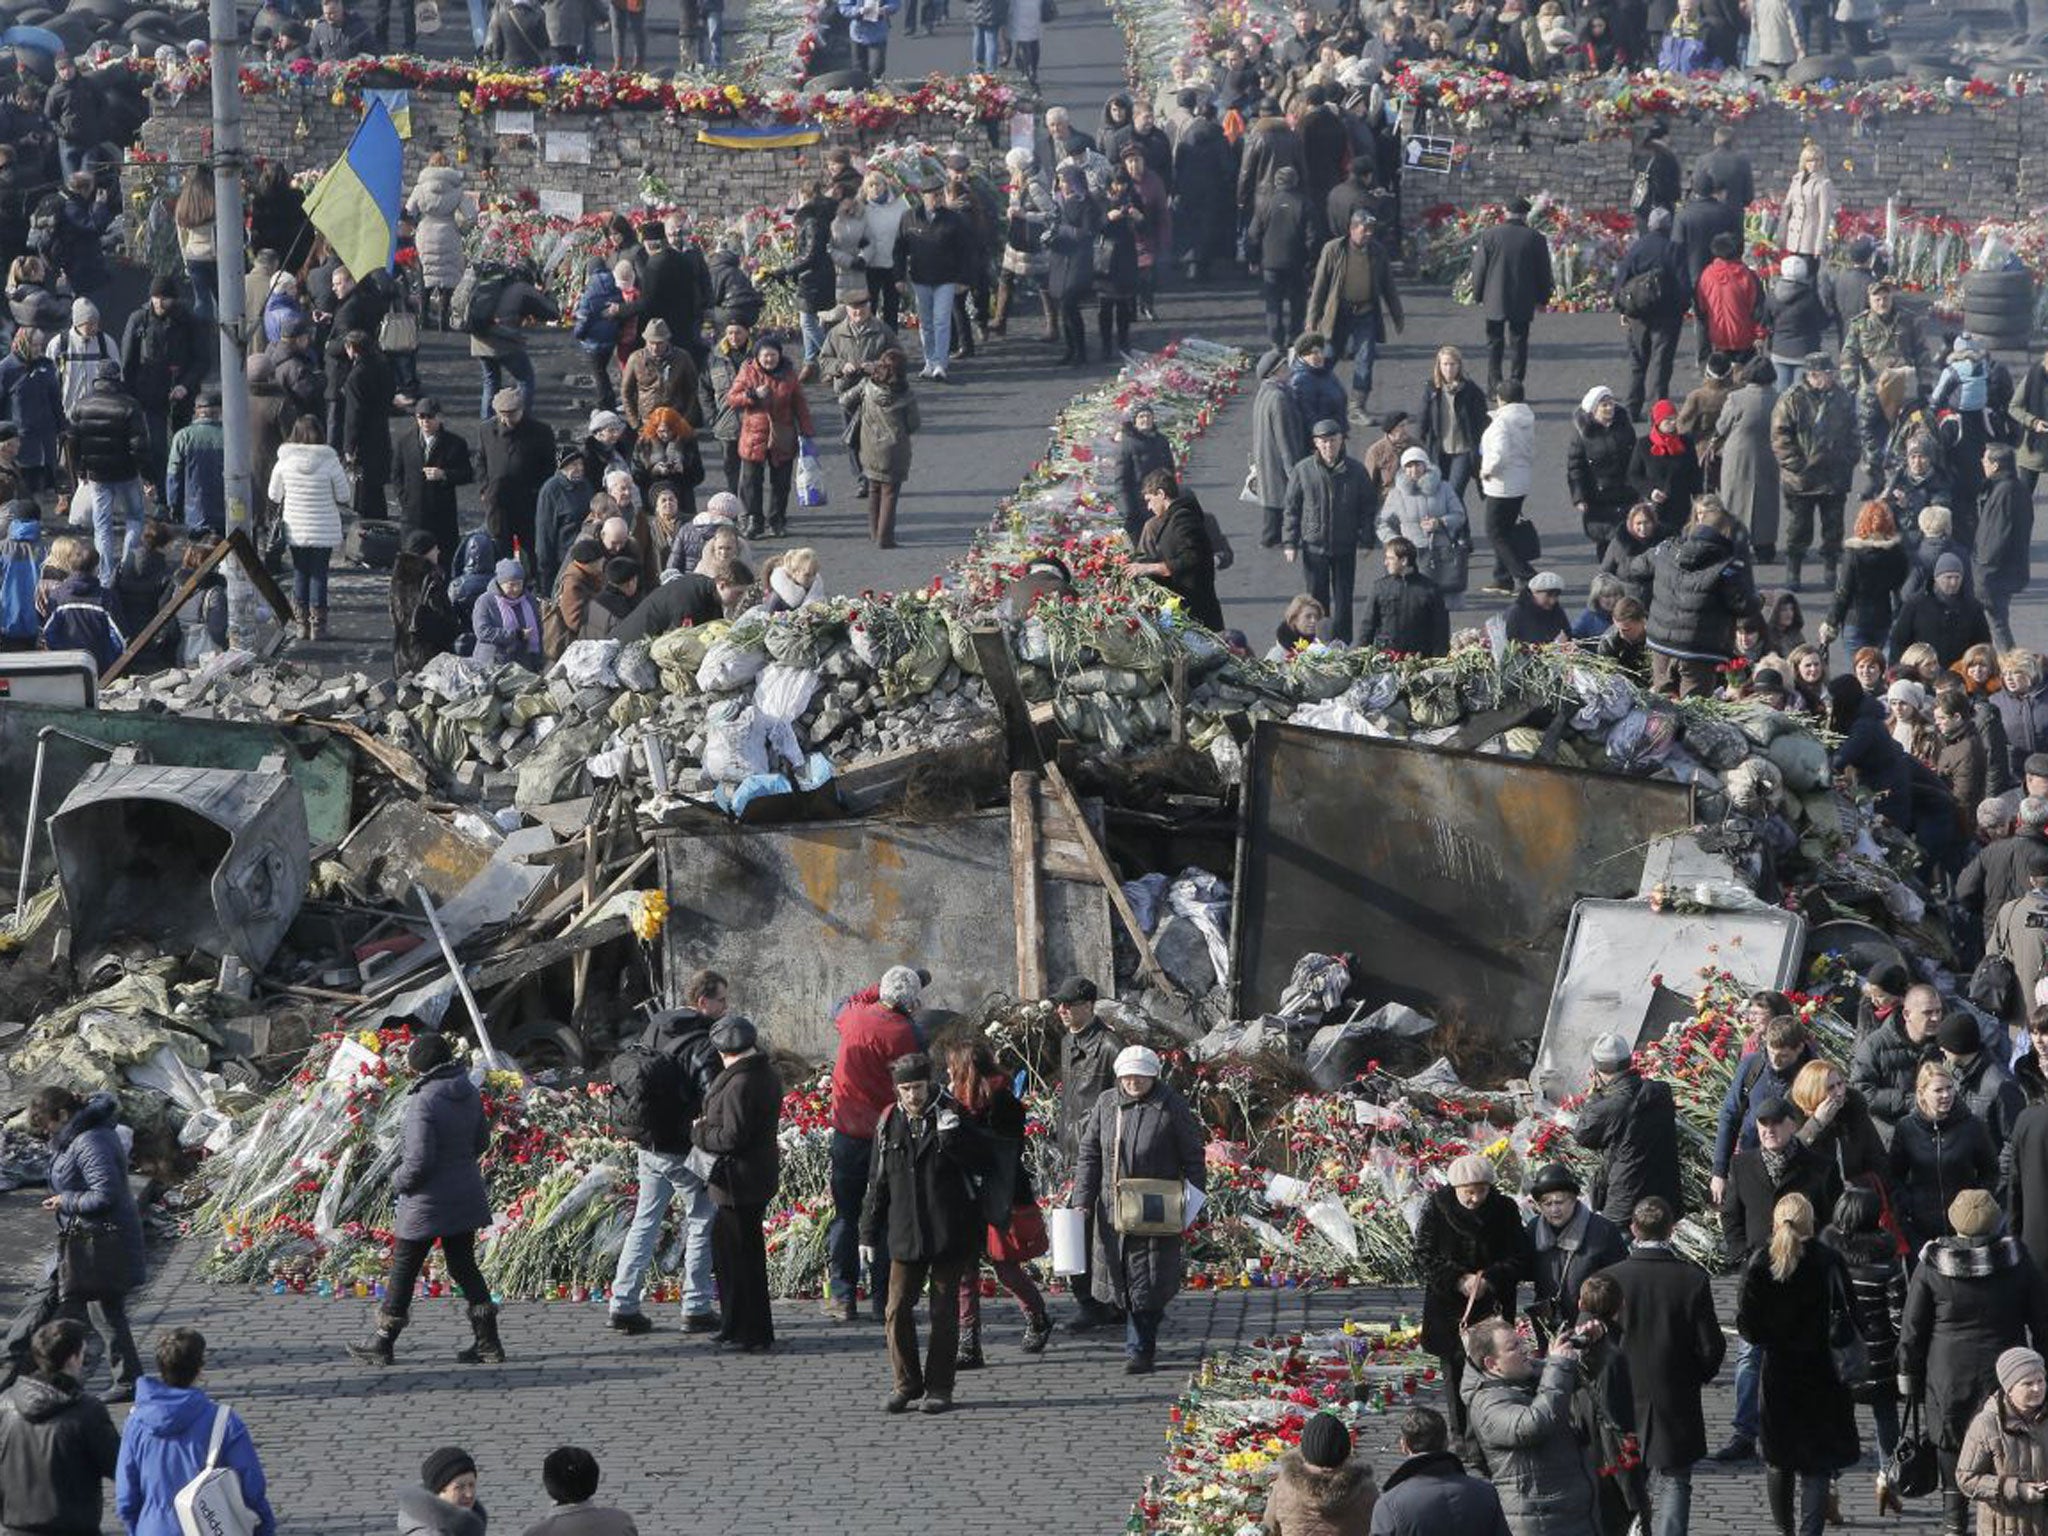 Flowers cover the ground and barricades where protesters were killed in a recent clash with riot police in Kiev's Independence Square